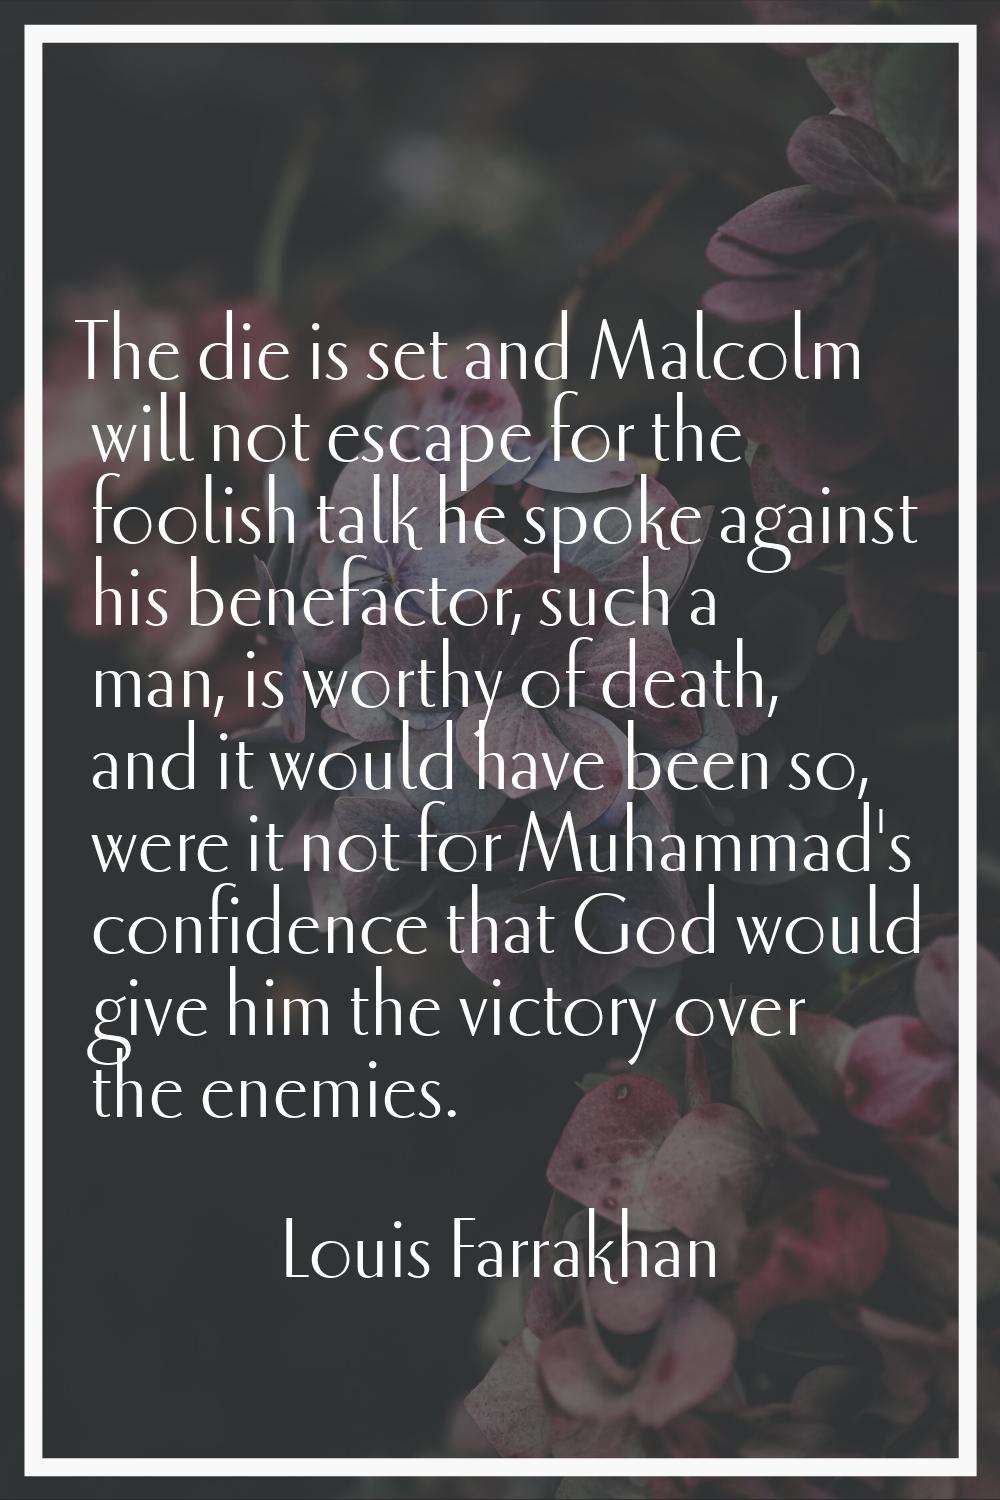 The die is set and Malcolm will not escape for the foolish talk he spoke against his benefactor, su